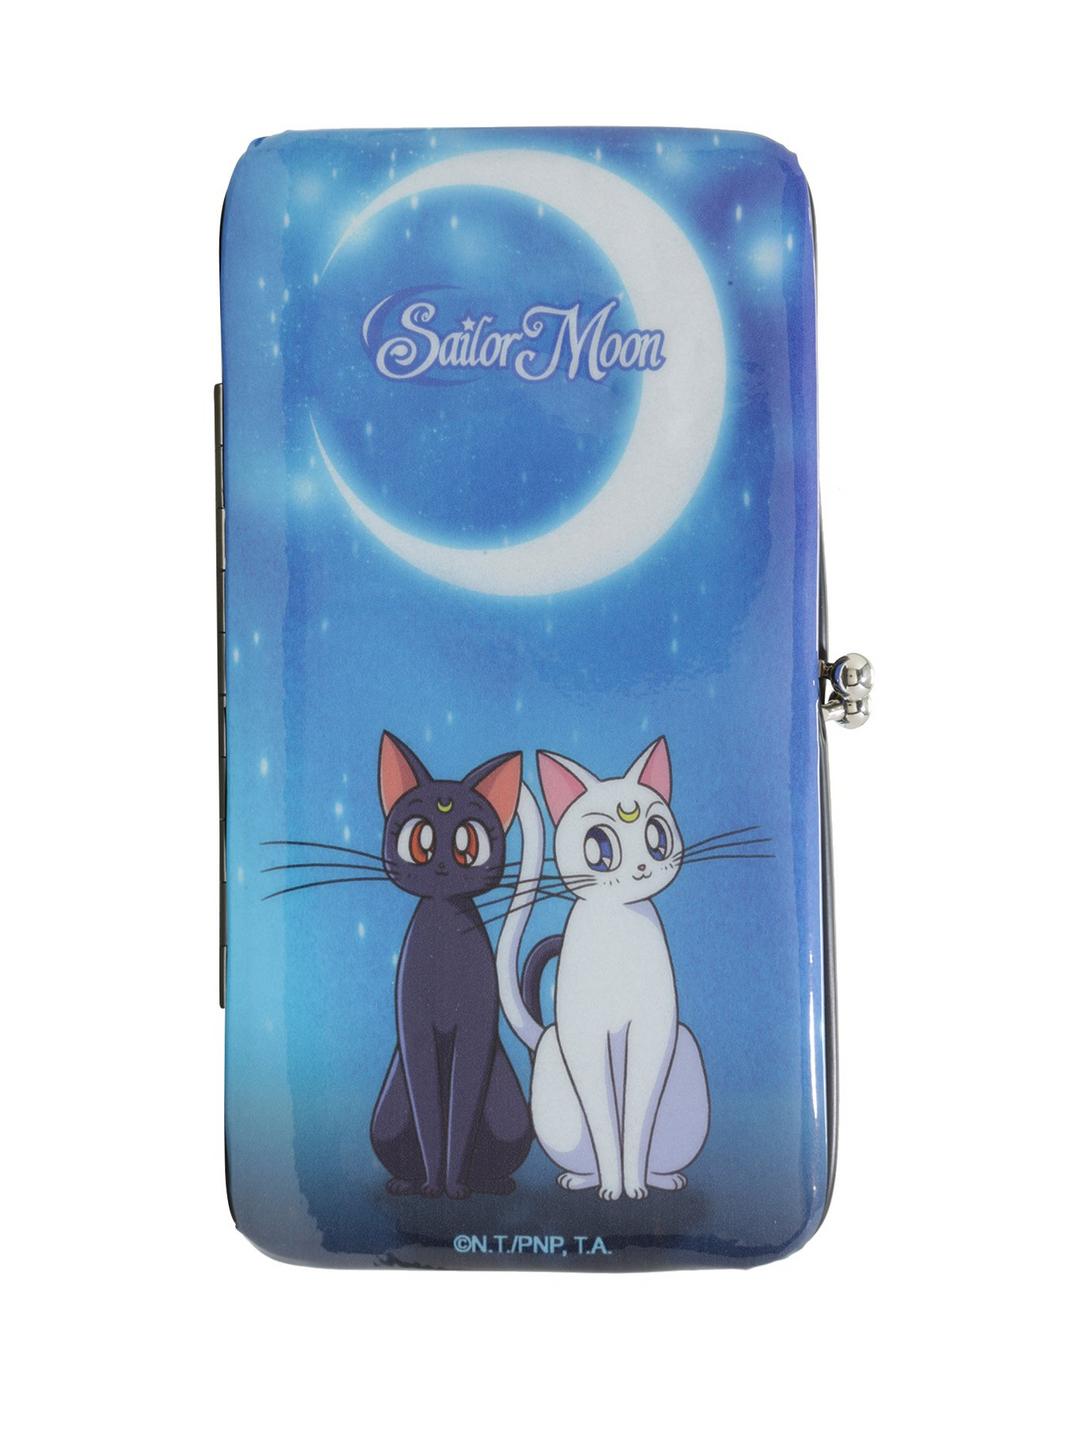 OFFICIAL SAILOR MOON LUNA AND ARTEMIS CAT PURSE WALLET NEW WITH TAGS 